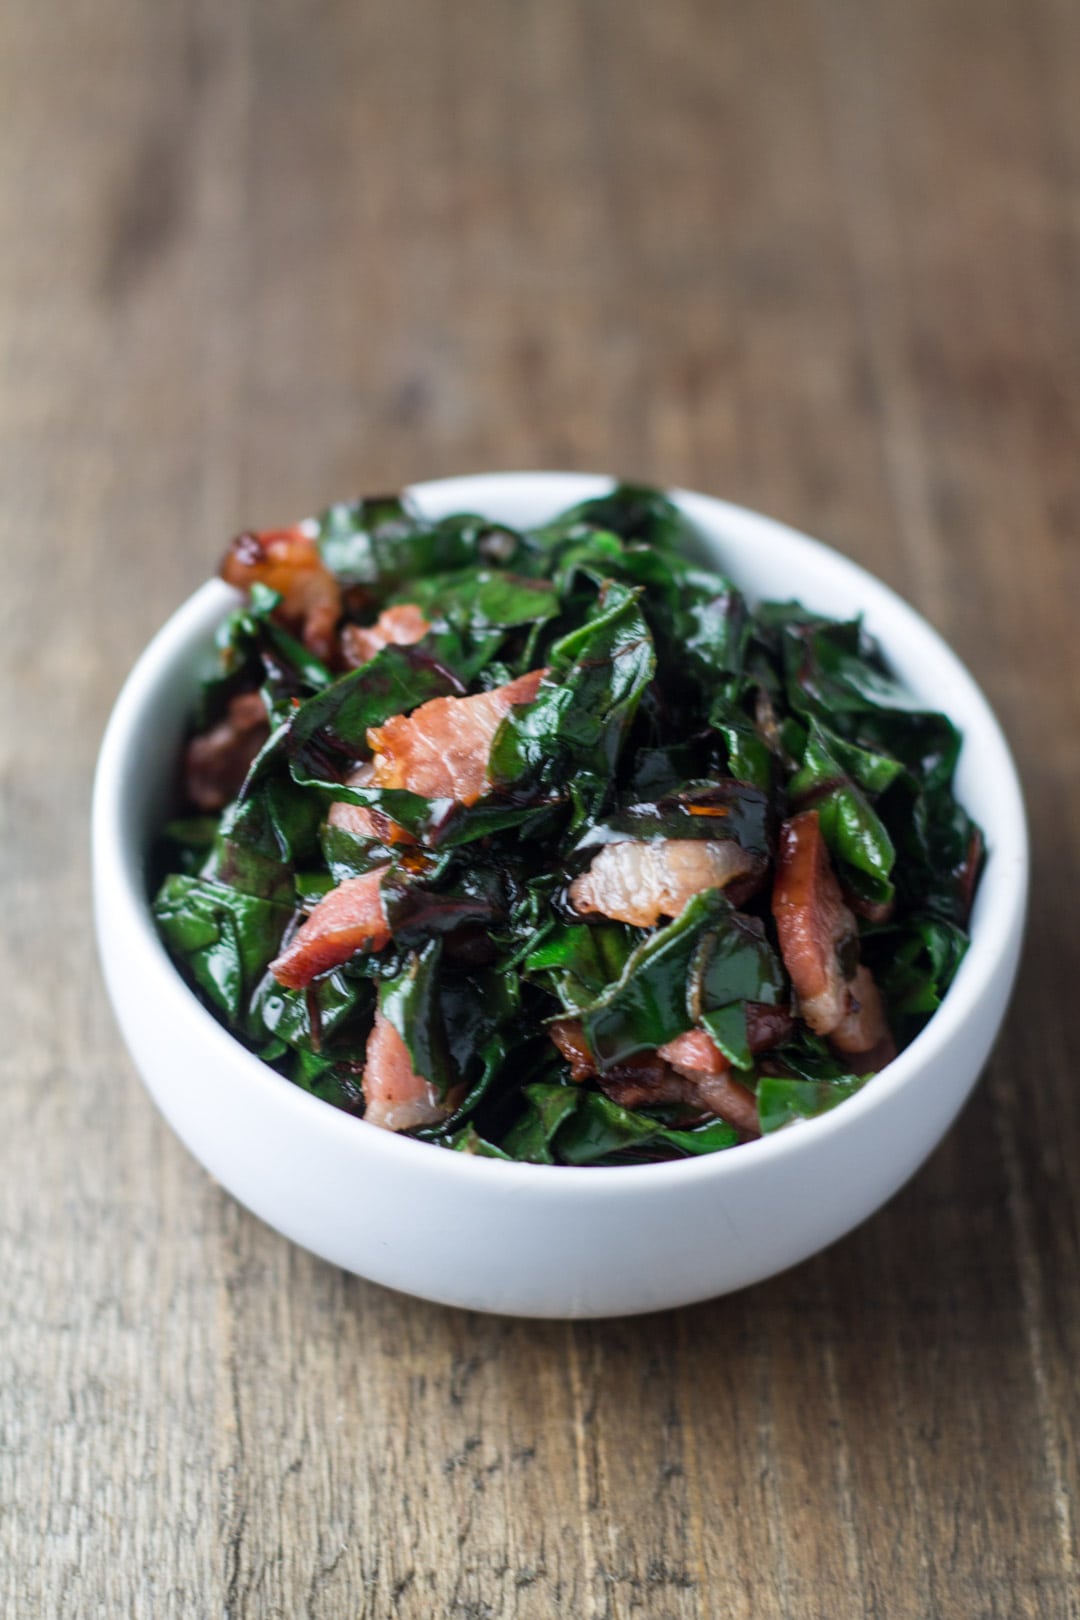 A small bowl of Swiss chard and bacon crumbles.